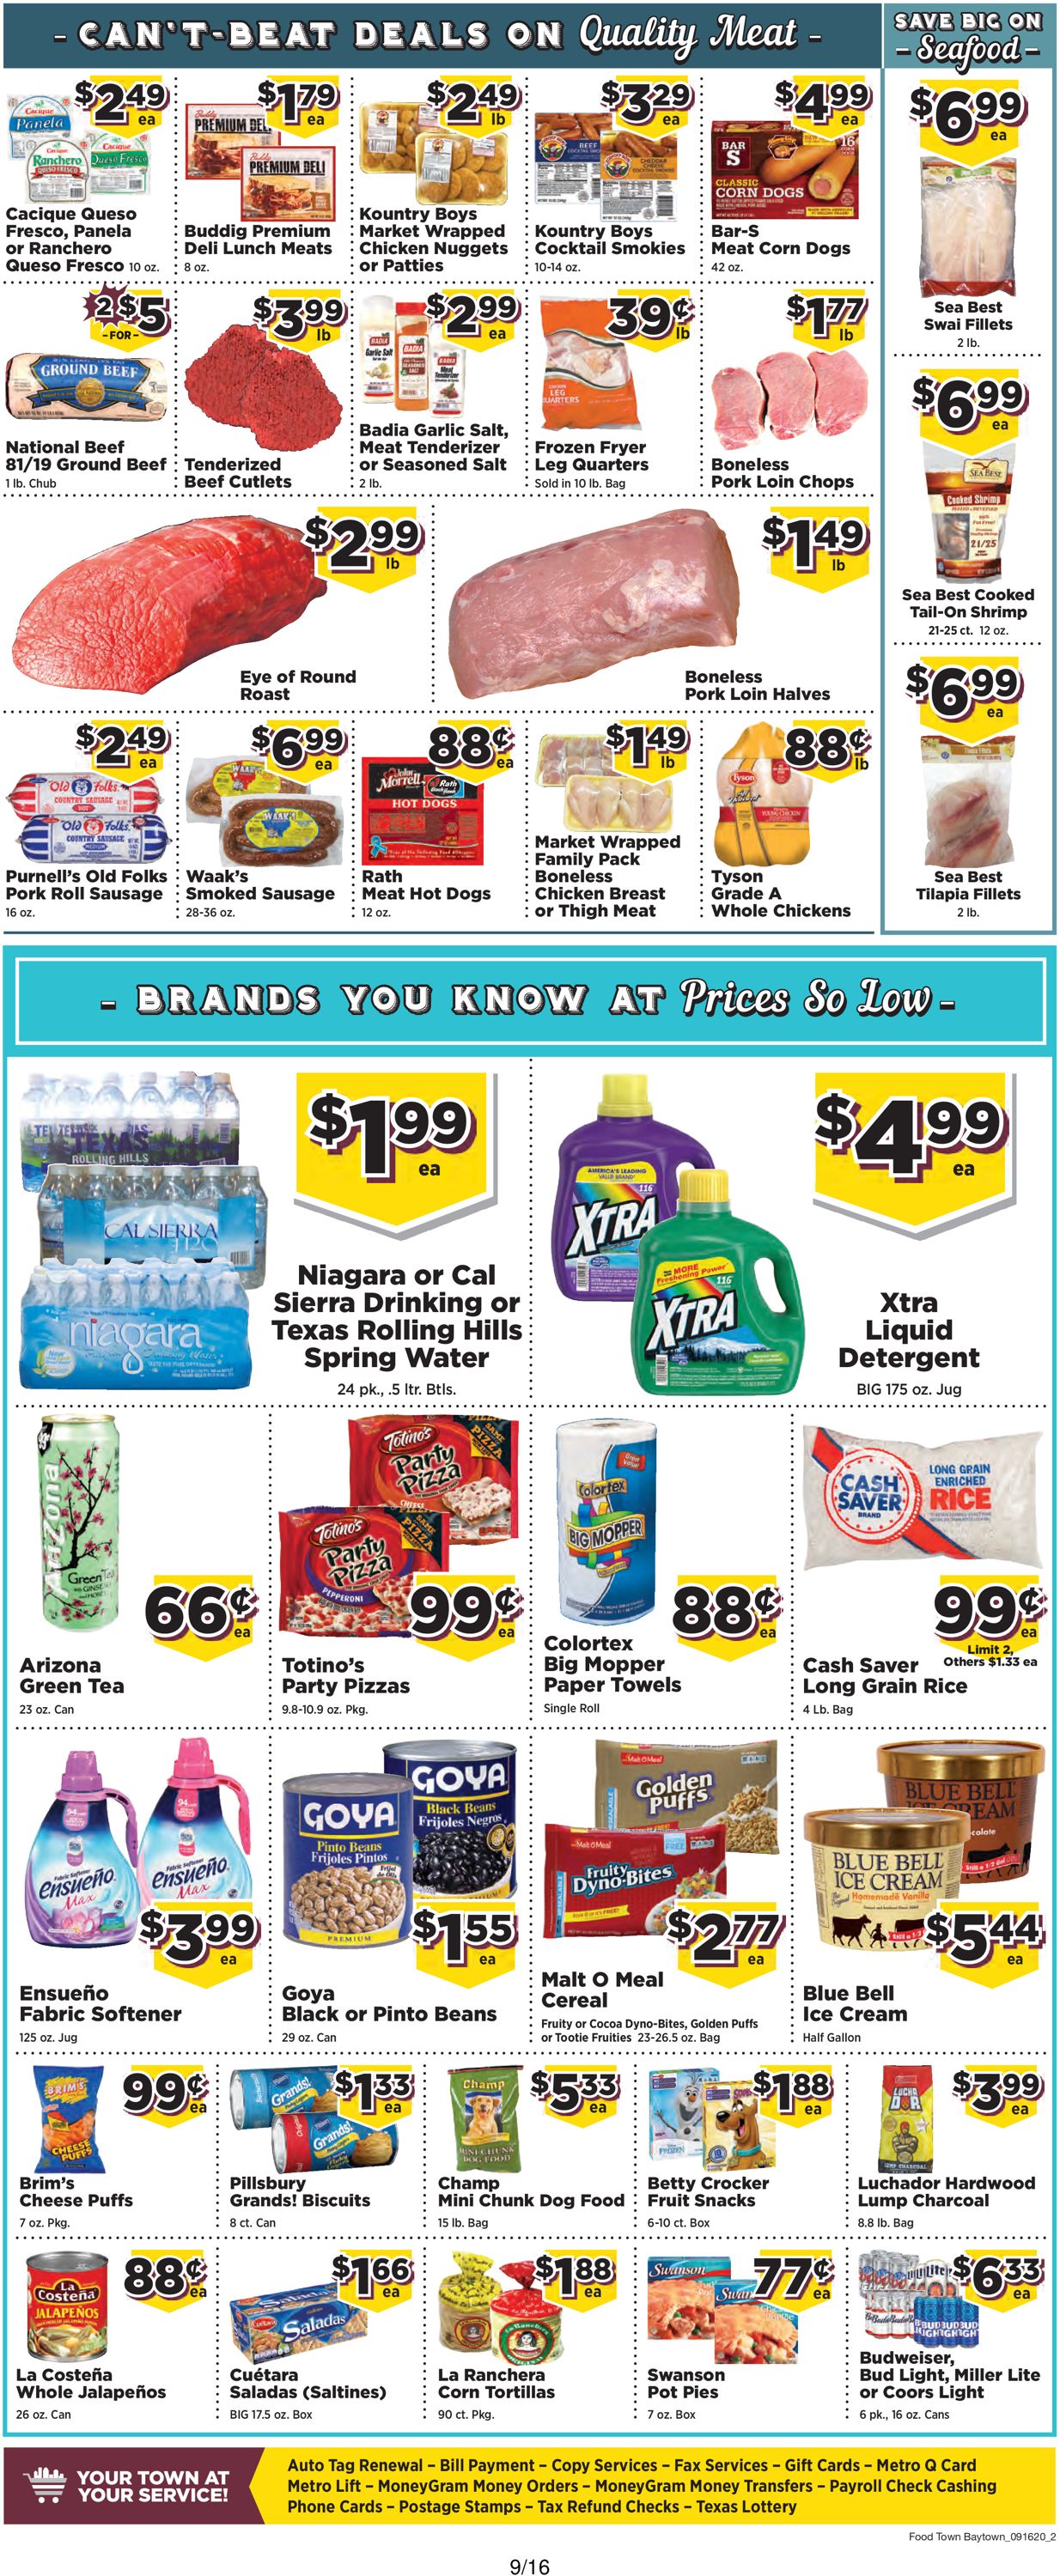 Food Town Ad from 09/16/2020